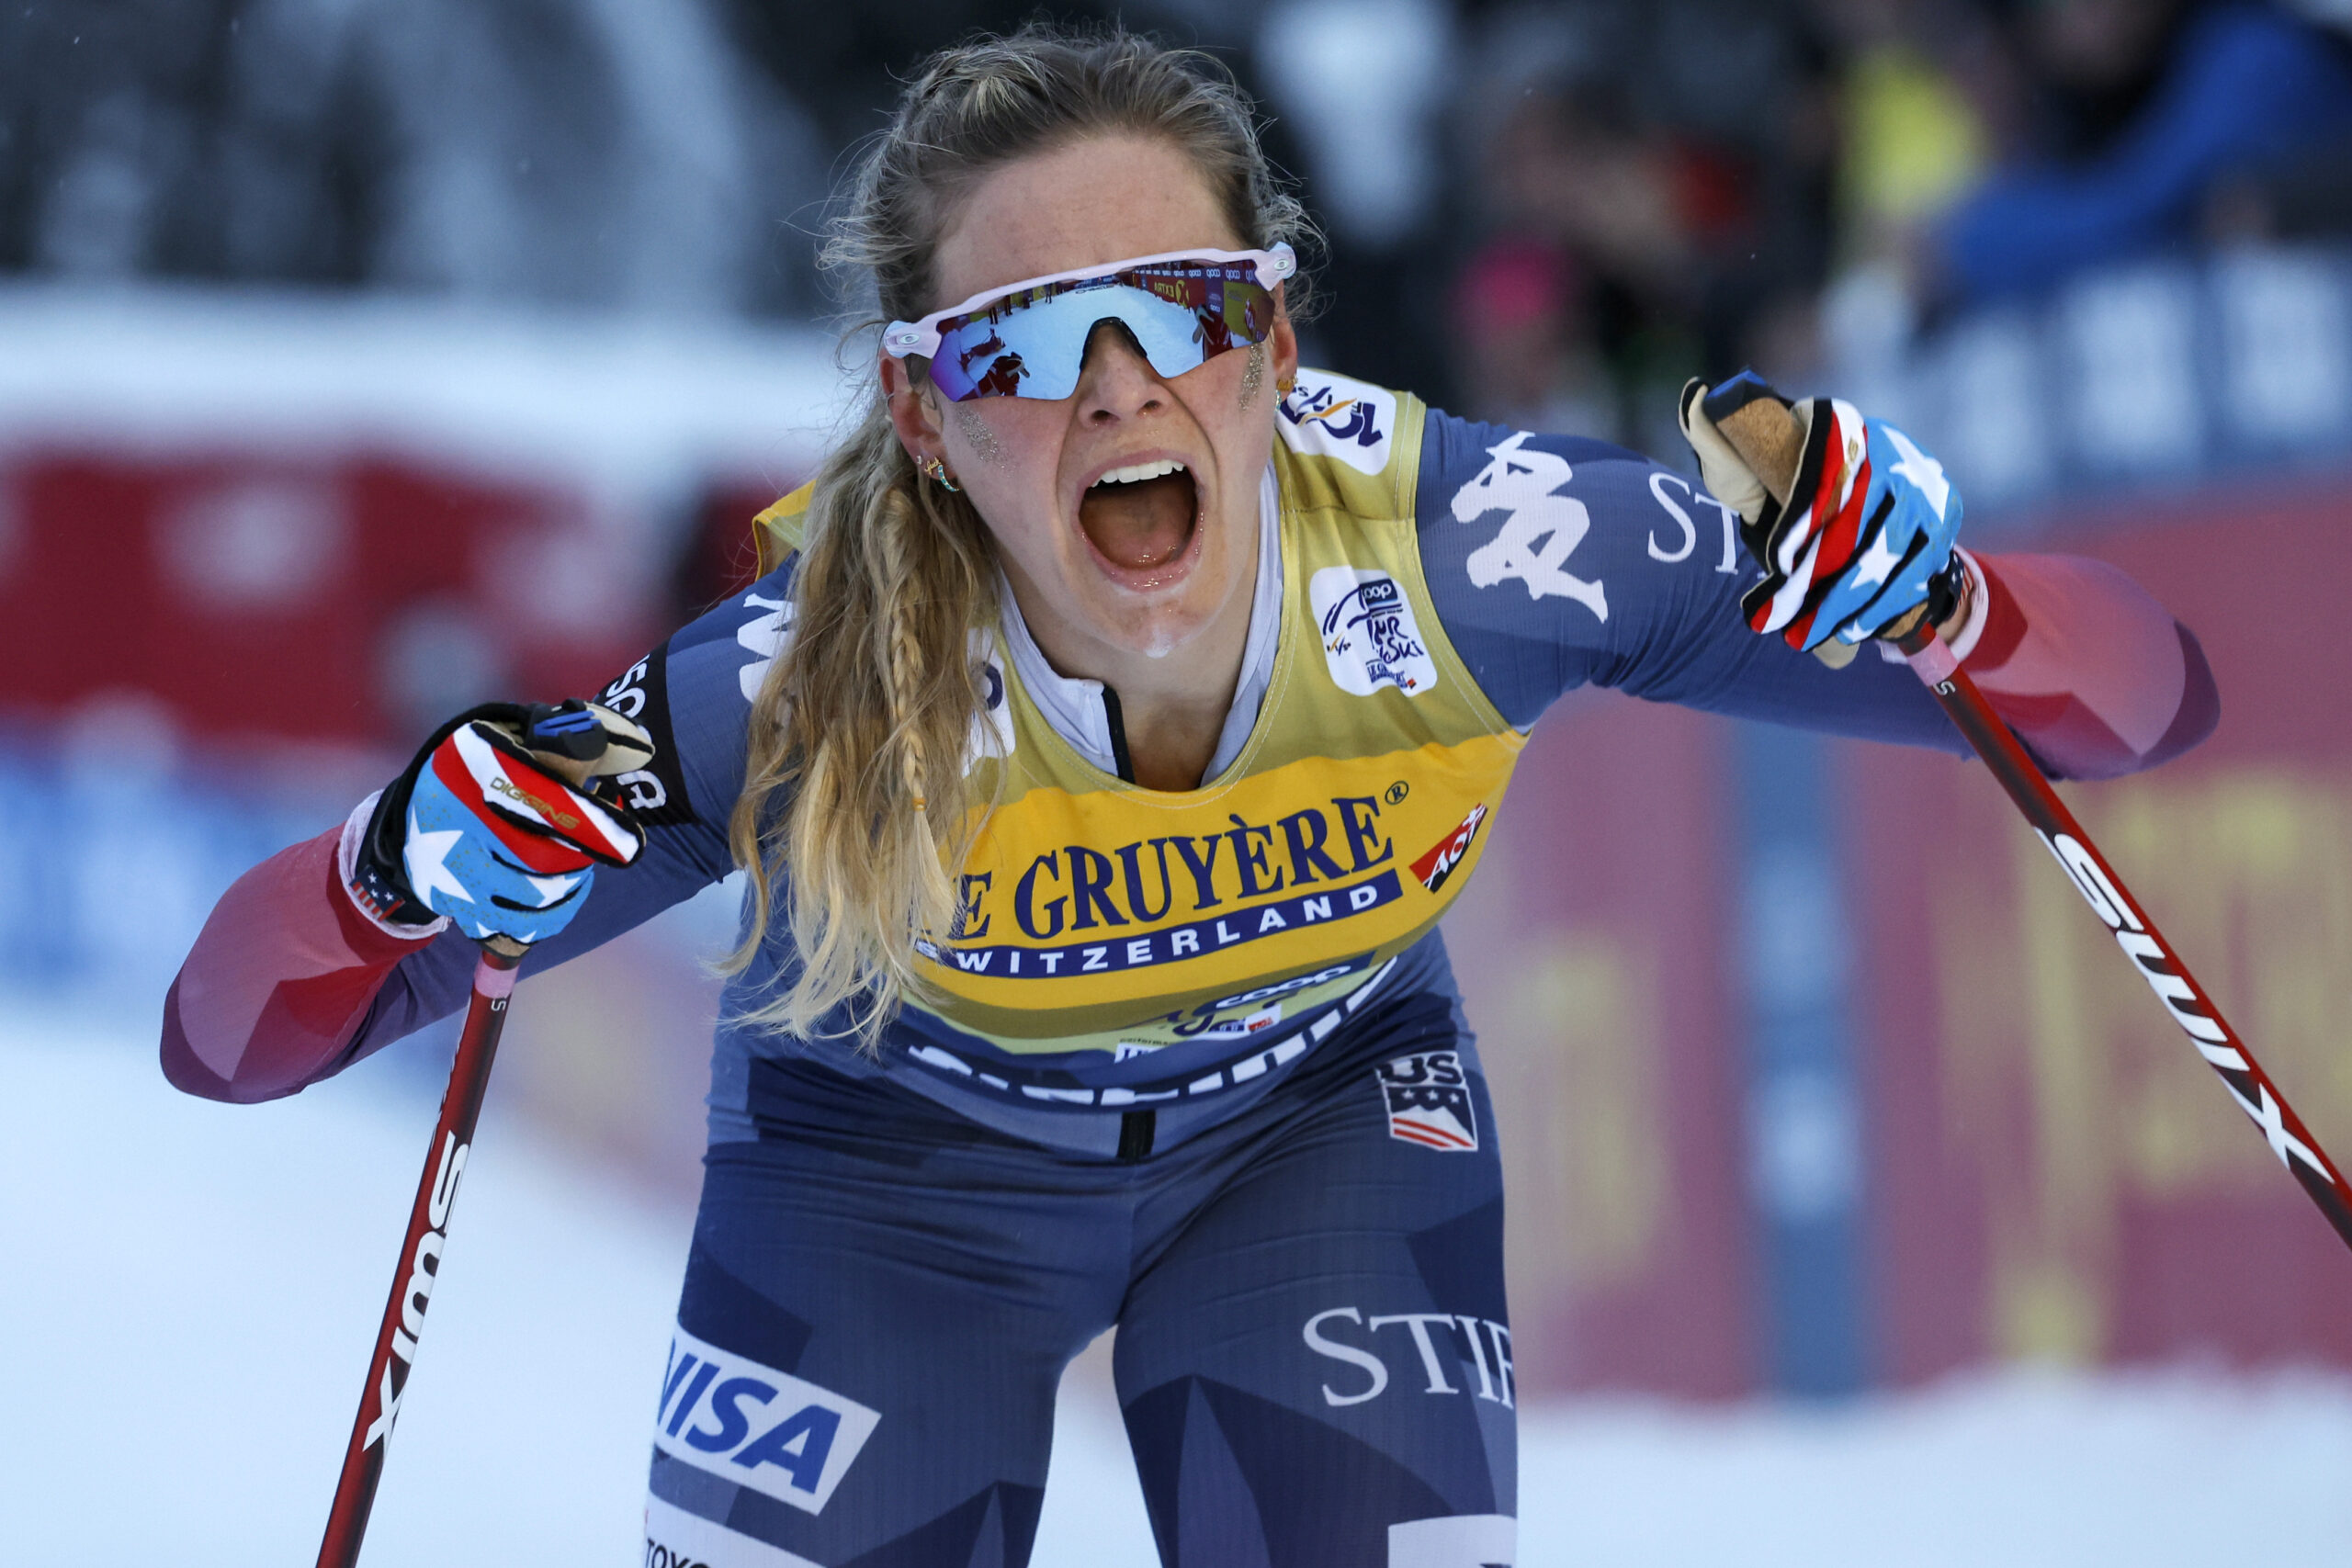 Cross-country skiing world champ Jessie Diggins; Weather Guys look toward May